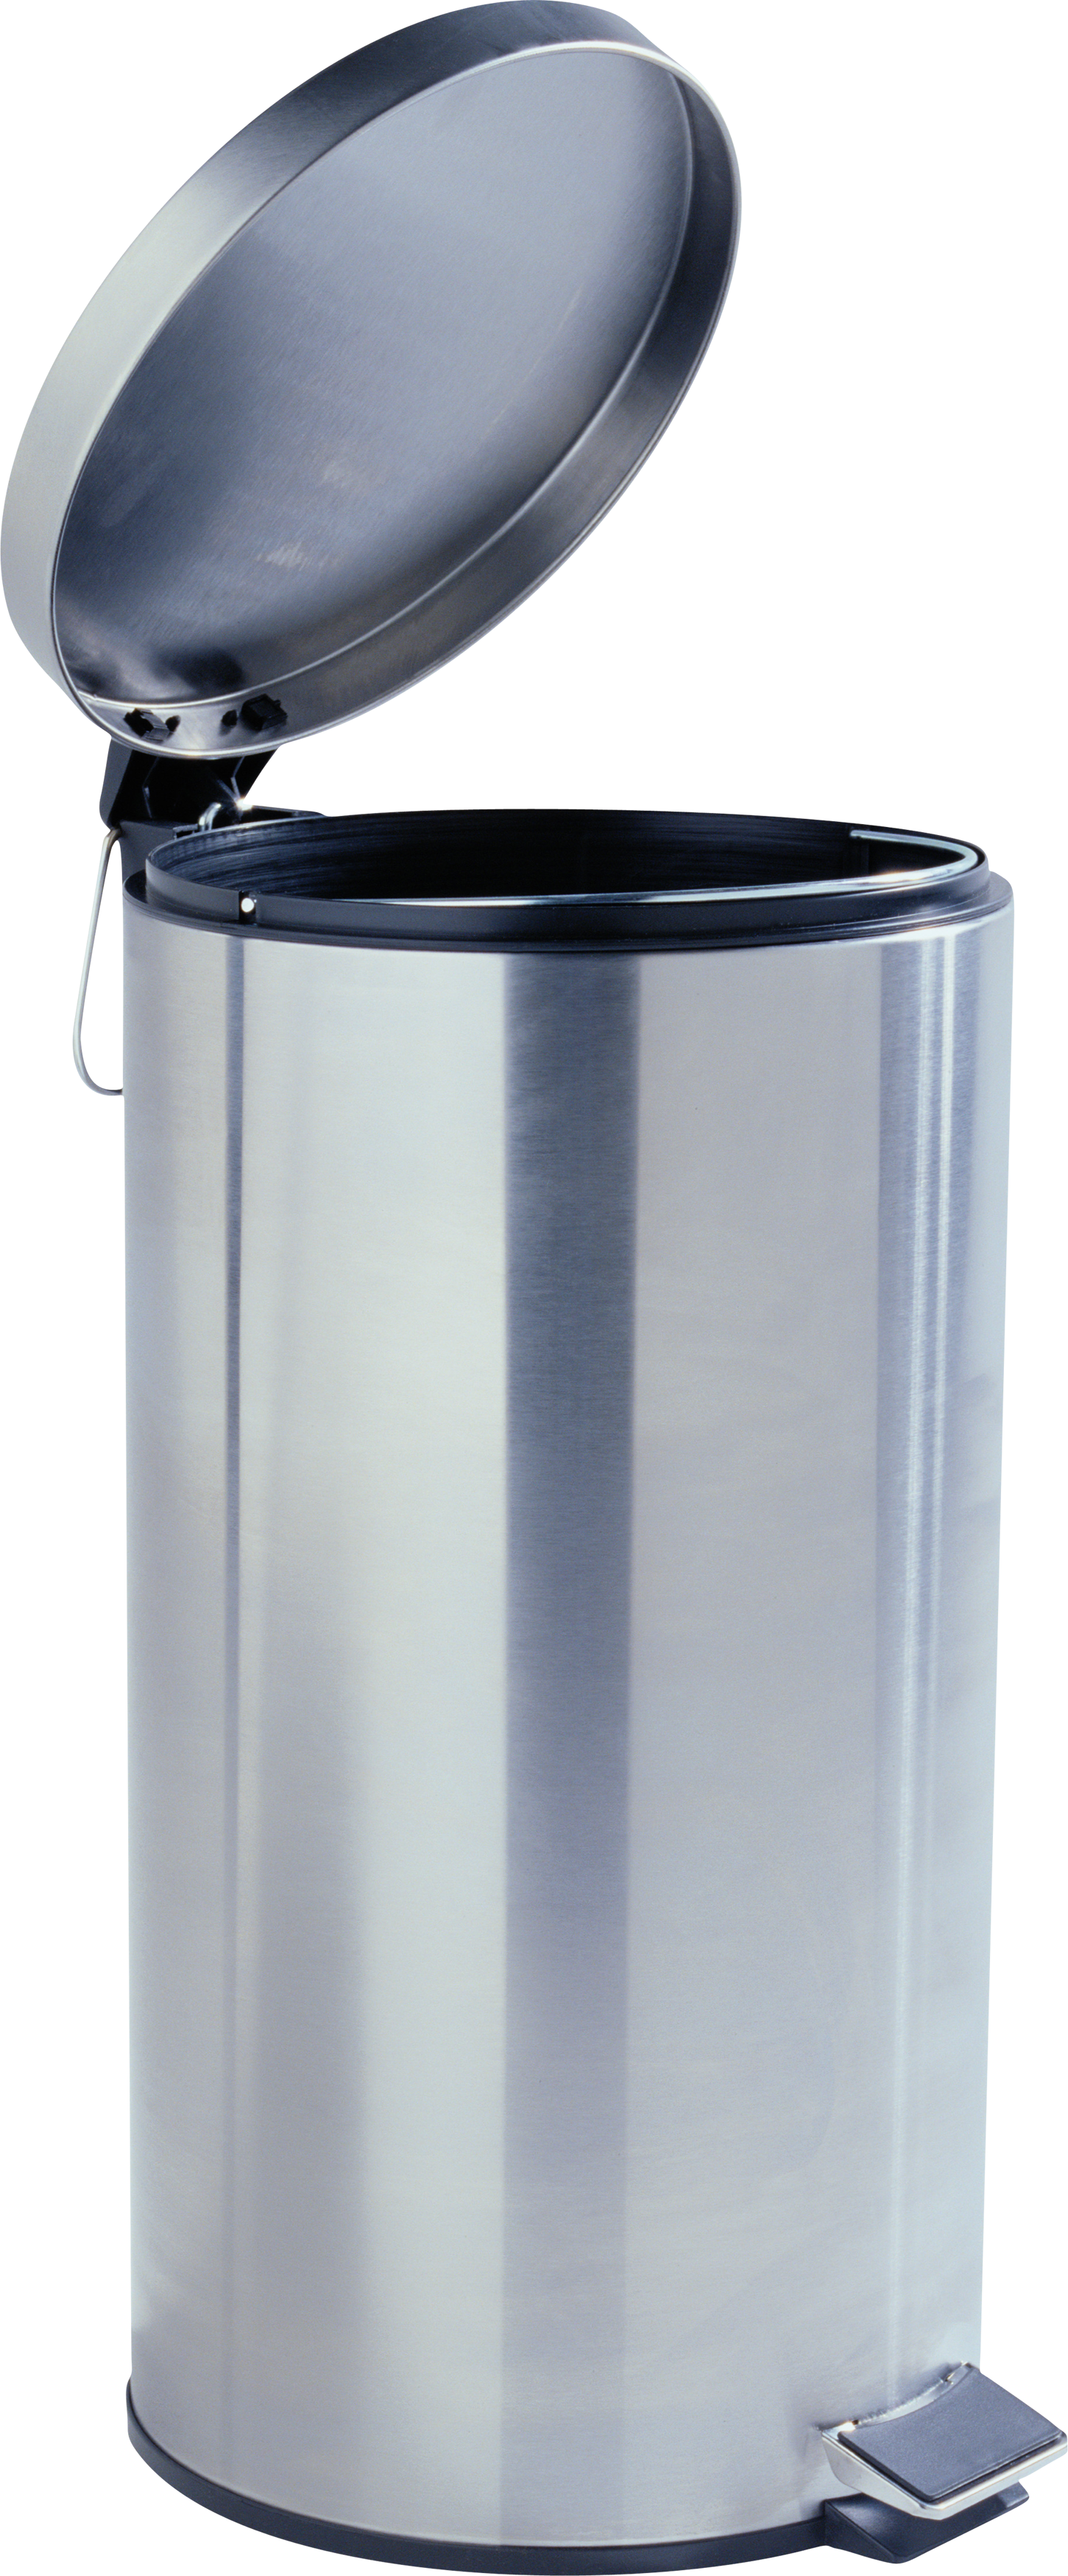 Download Trash Can PNG Image for Free